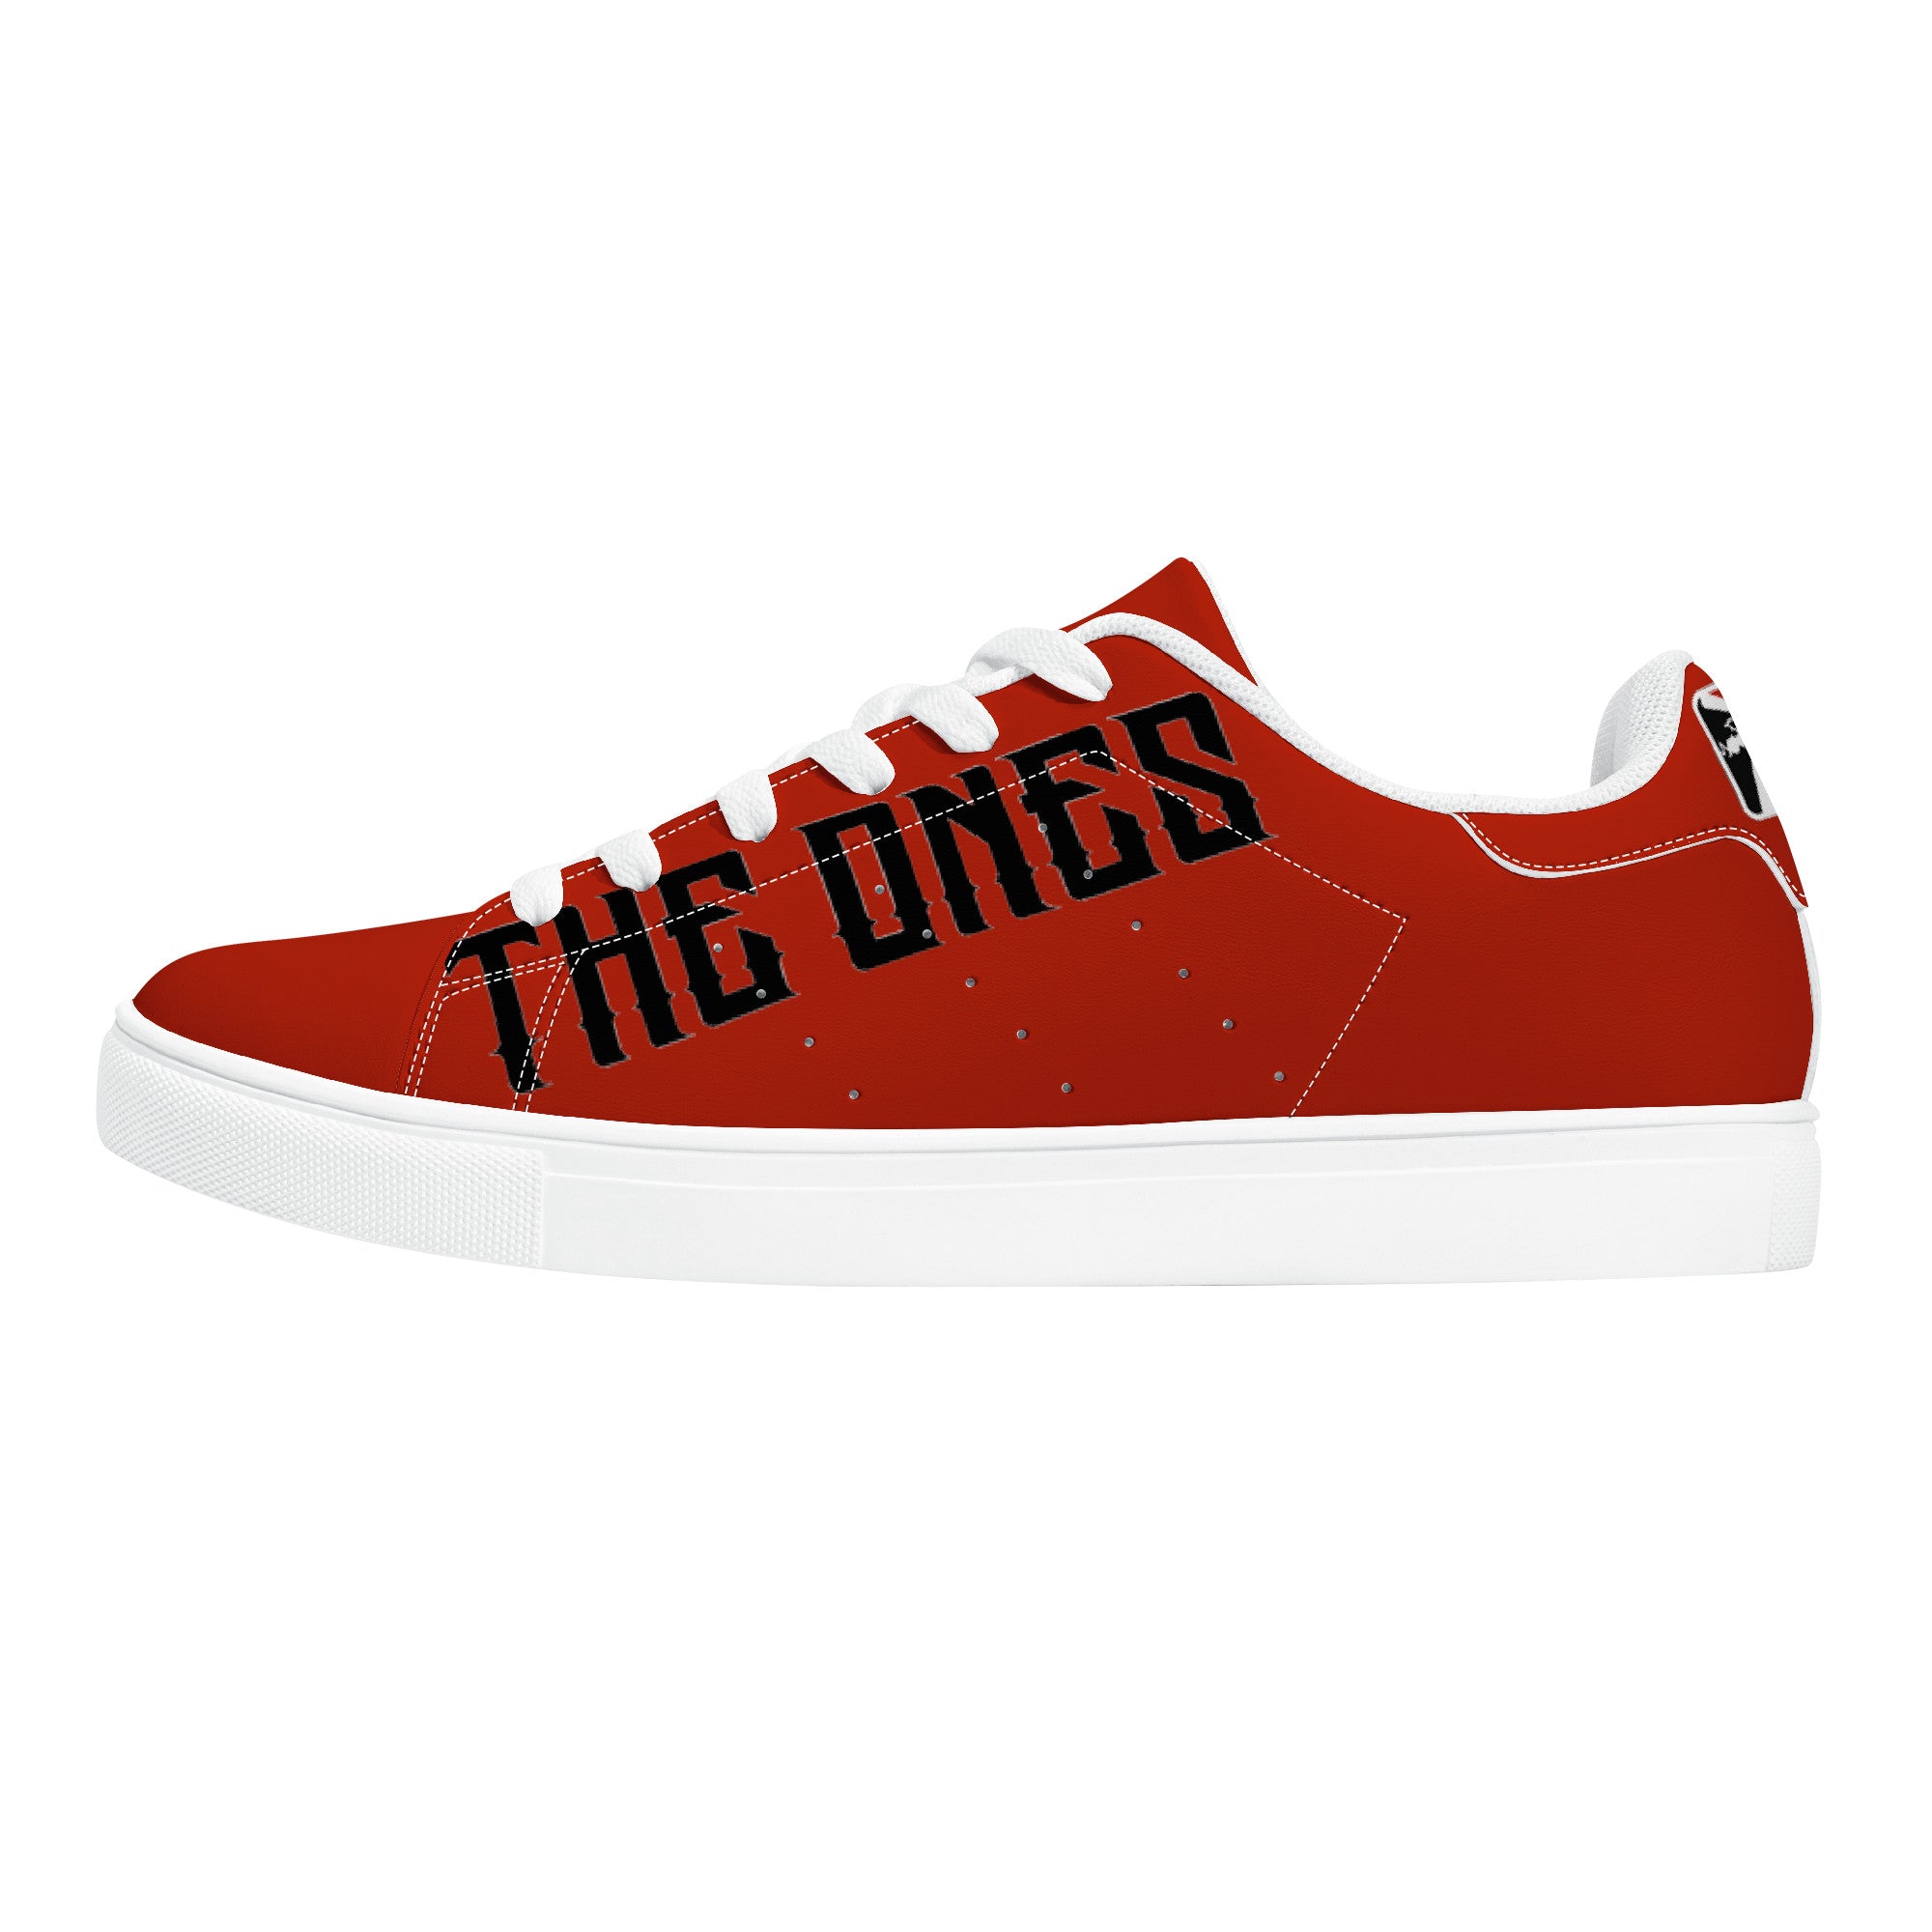 The Ones - Red on Black - Low-Top Synthetic Leather Sneakers - White - Shoe Zero